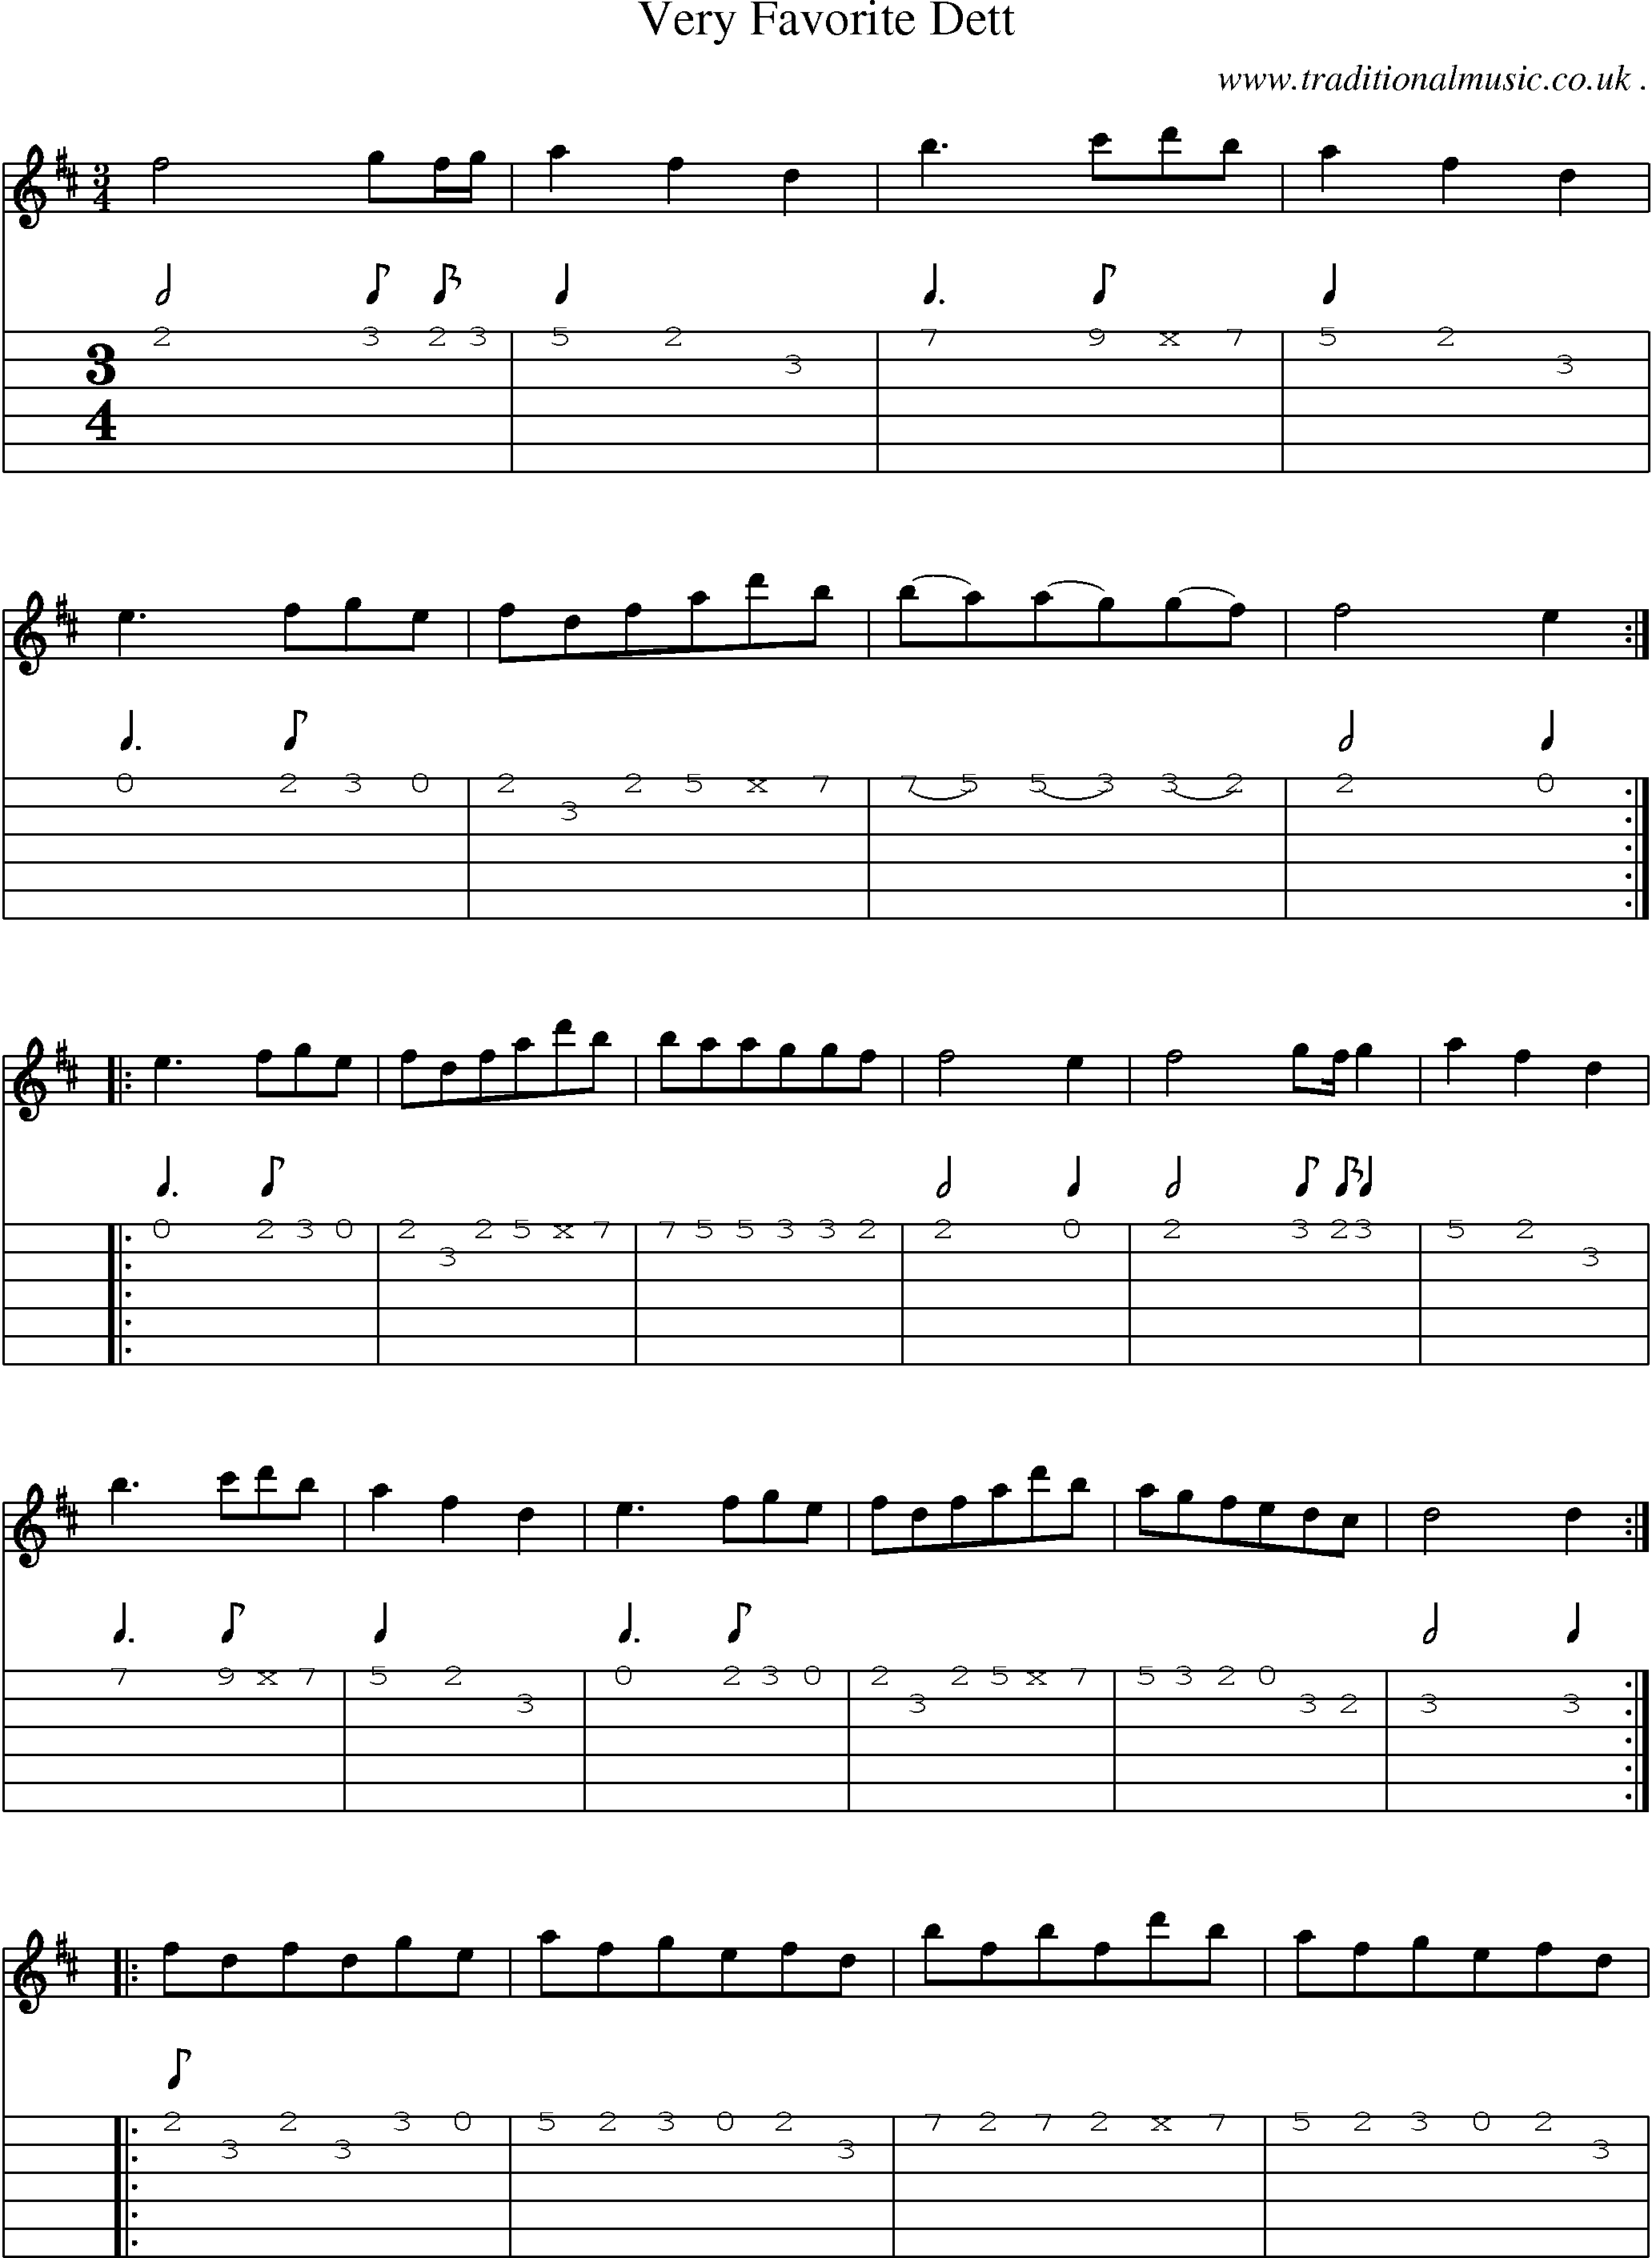 Sheet-Music and Guitar Tabs for Very Favorite Dett